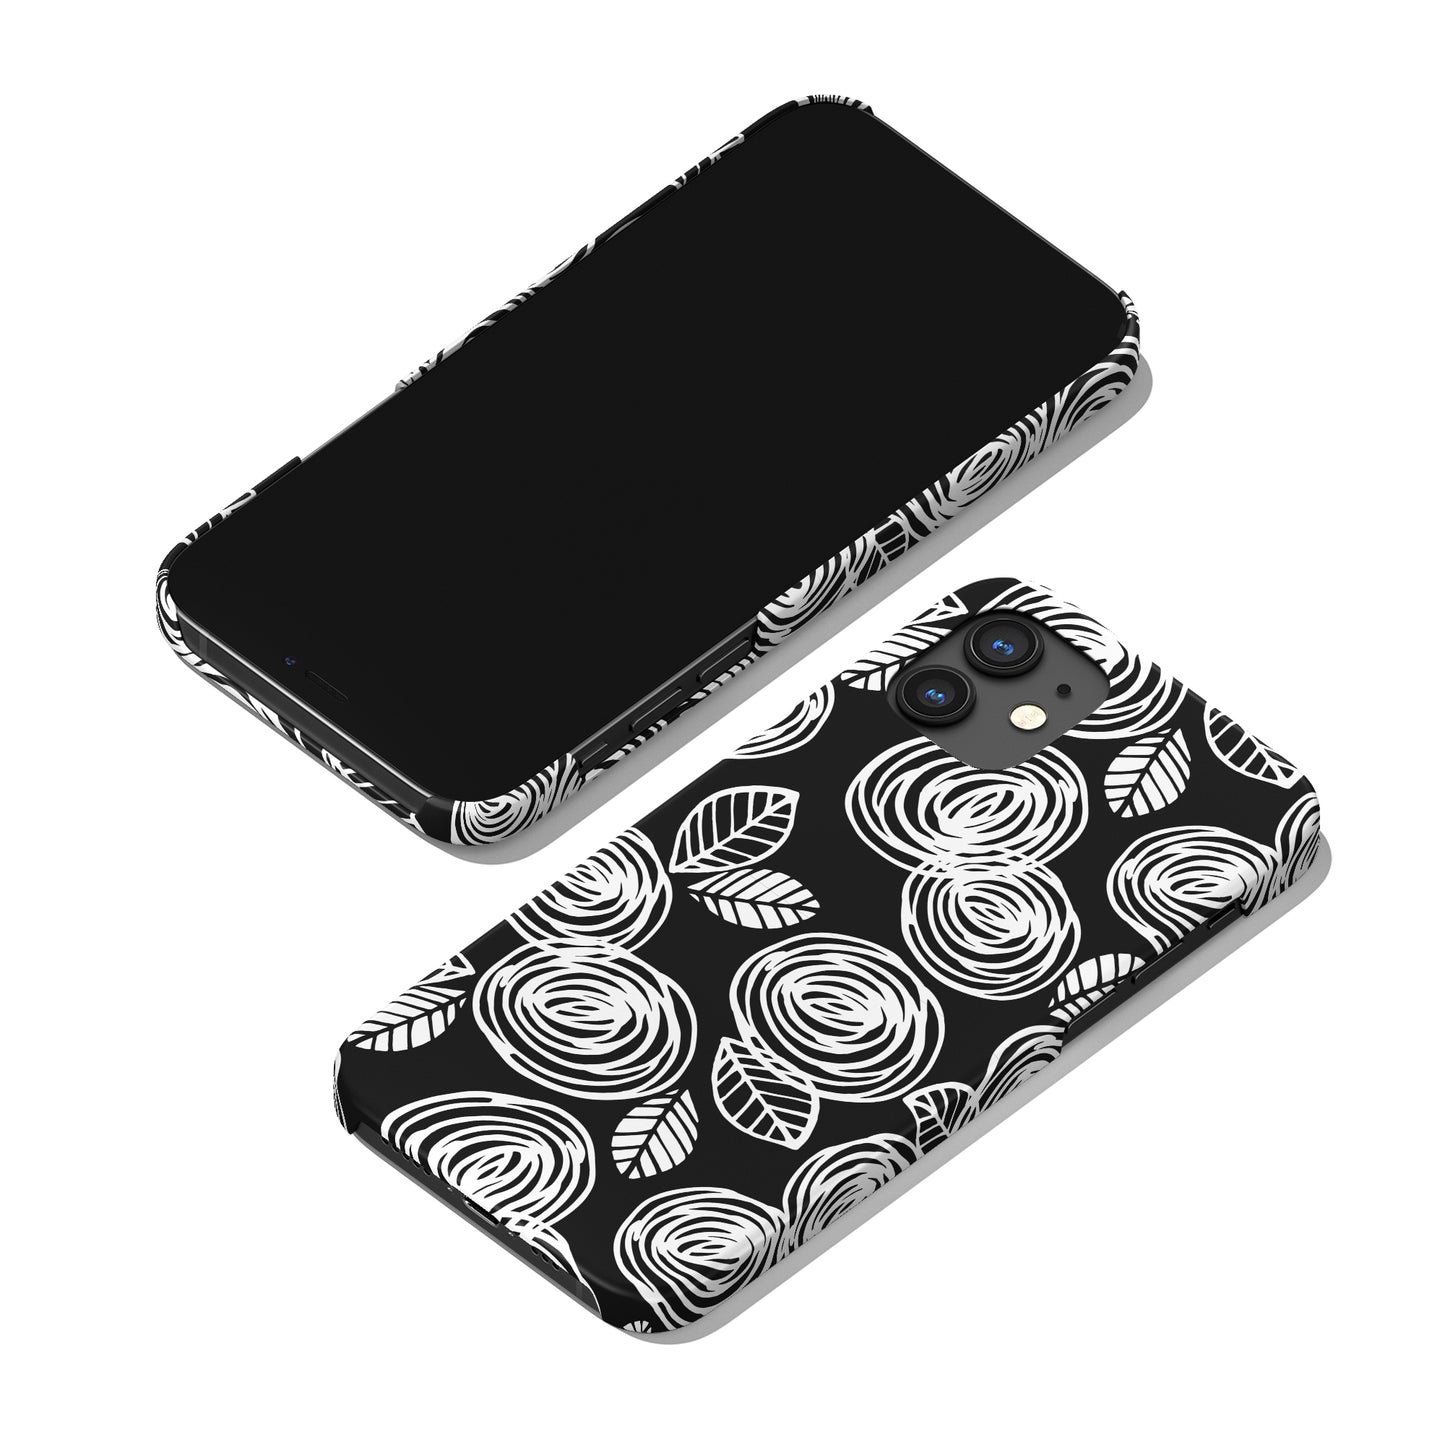 Black&White Abstract Floral Pattern iPhone Case